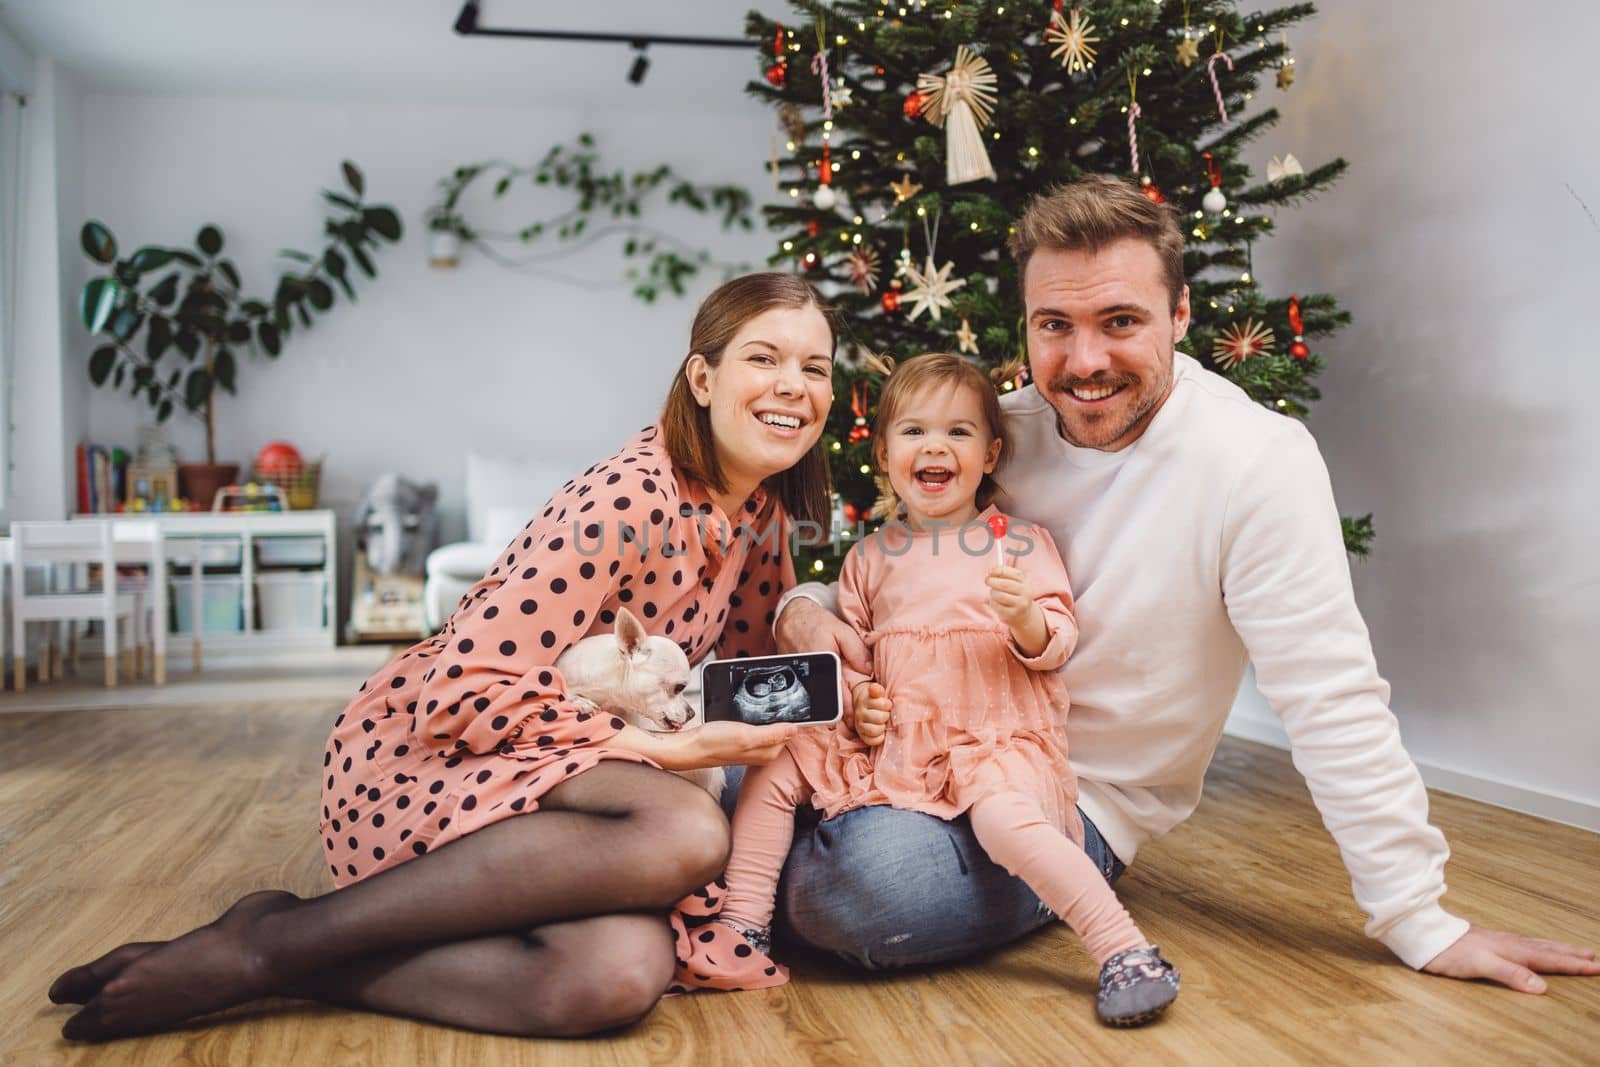 Cheerful young family announces a baby coming in the new year on Christmas day by VisualProductions